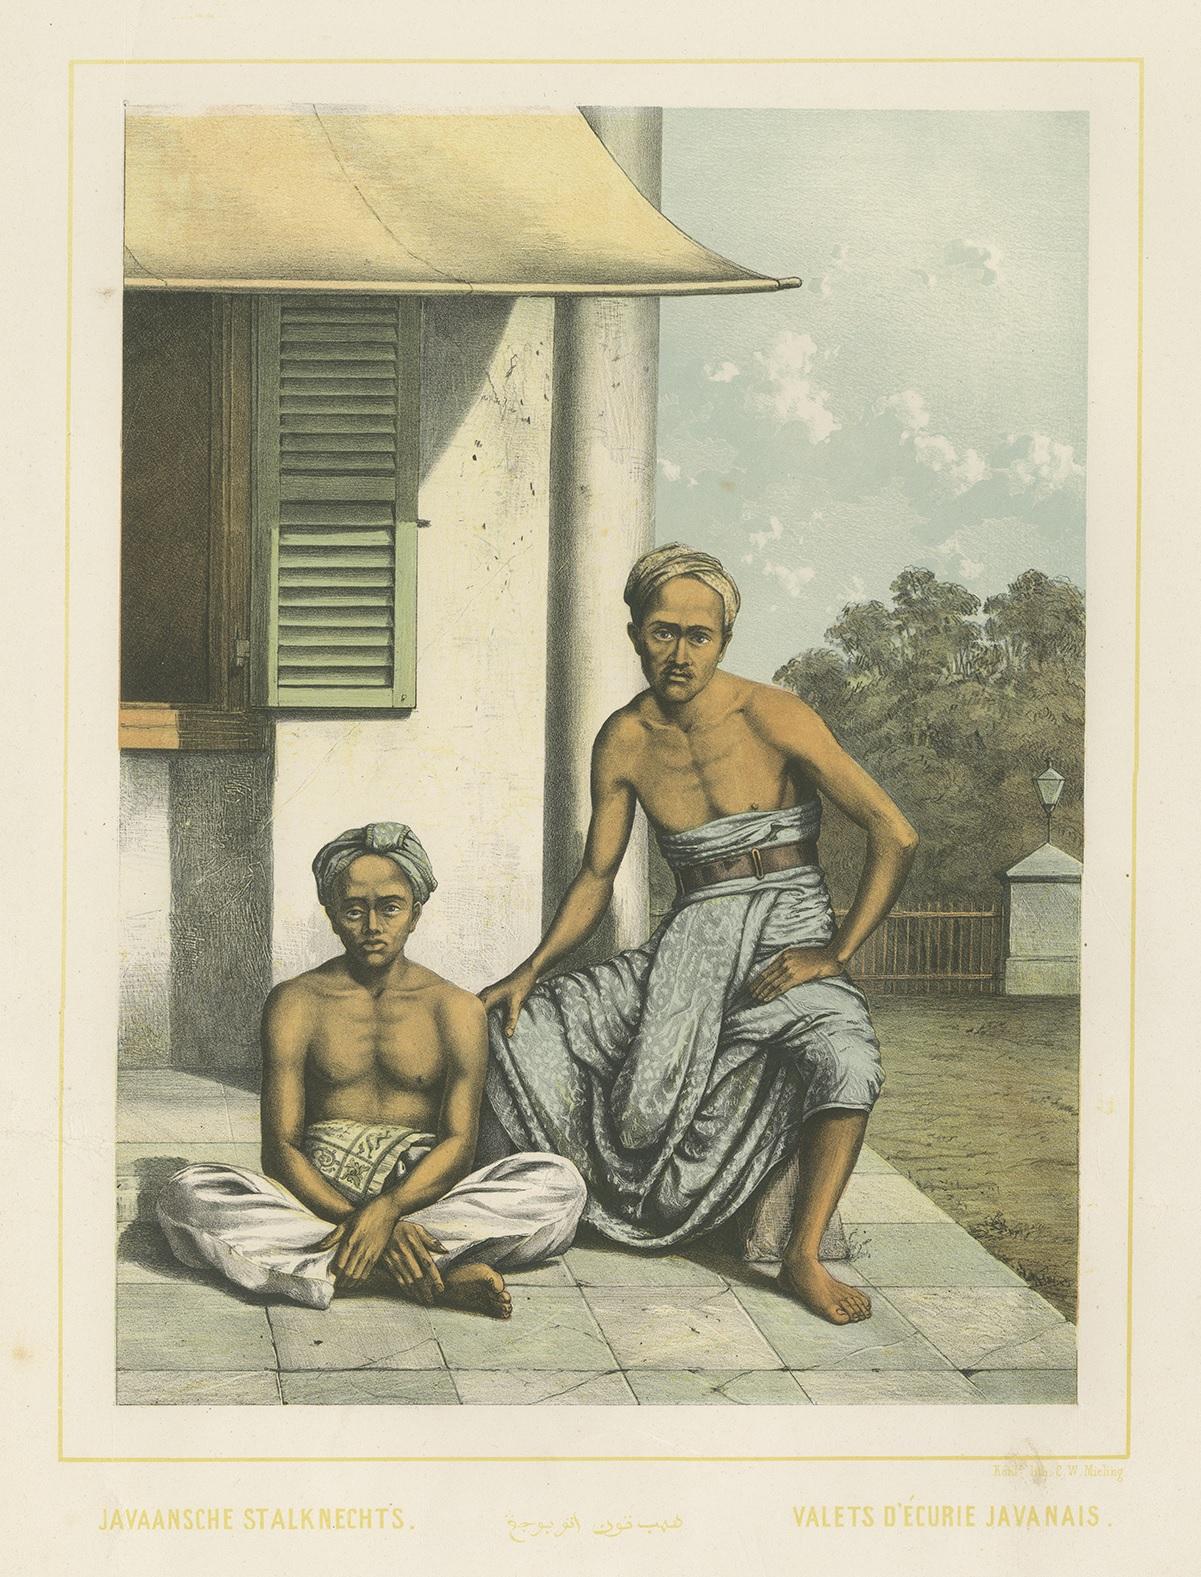 Antique print titled 'Javaansche Stalknechts - Valets d'Écurie Javanais'. Colored lithograph of Javanese stableboys. This print originates from 'Nederlandsch Oost-Indische typen' after work by Auguste van Pers (1815-1871) a Dutch artist who spent